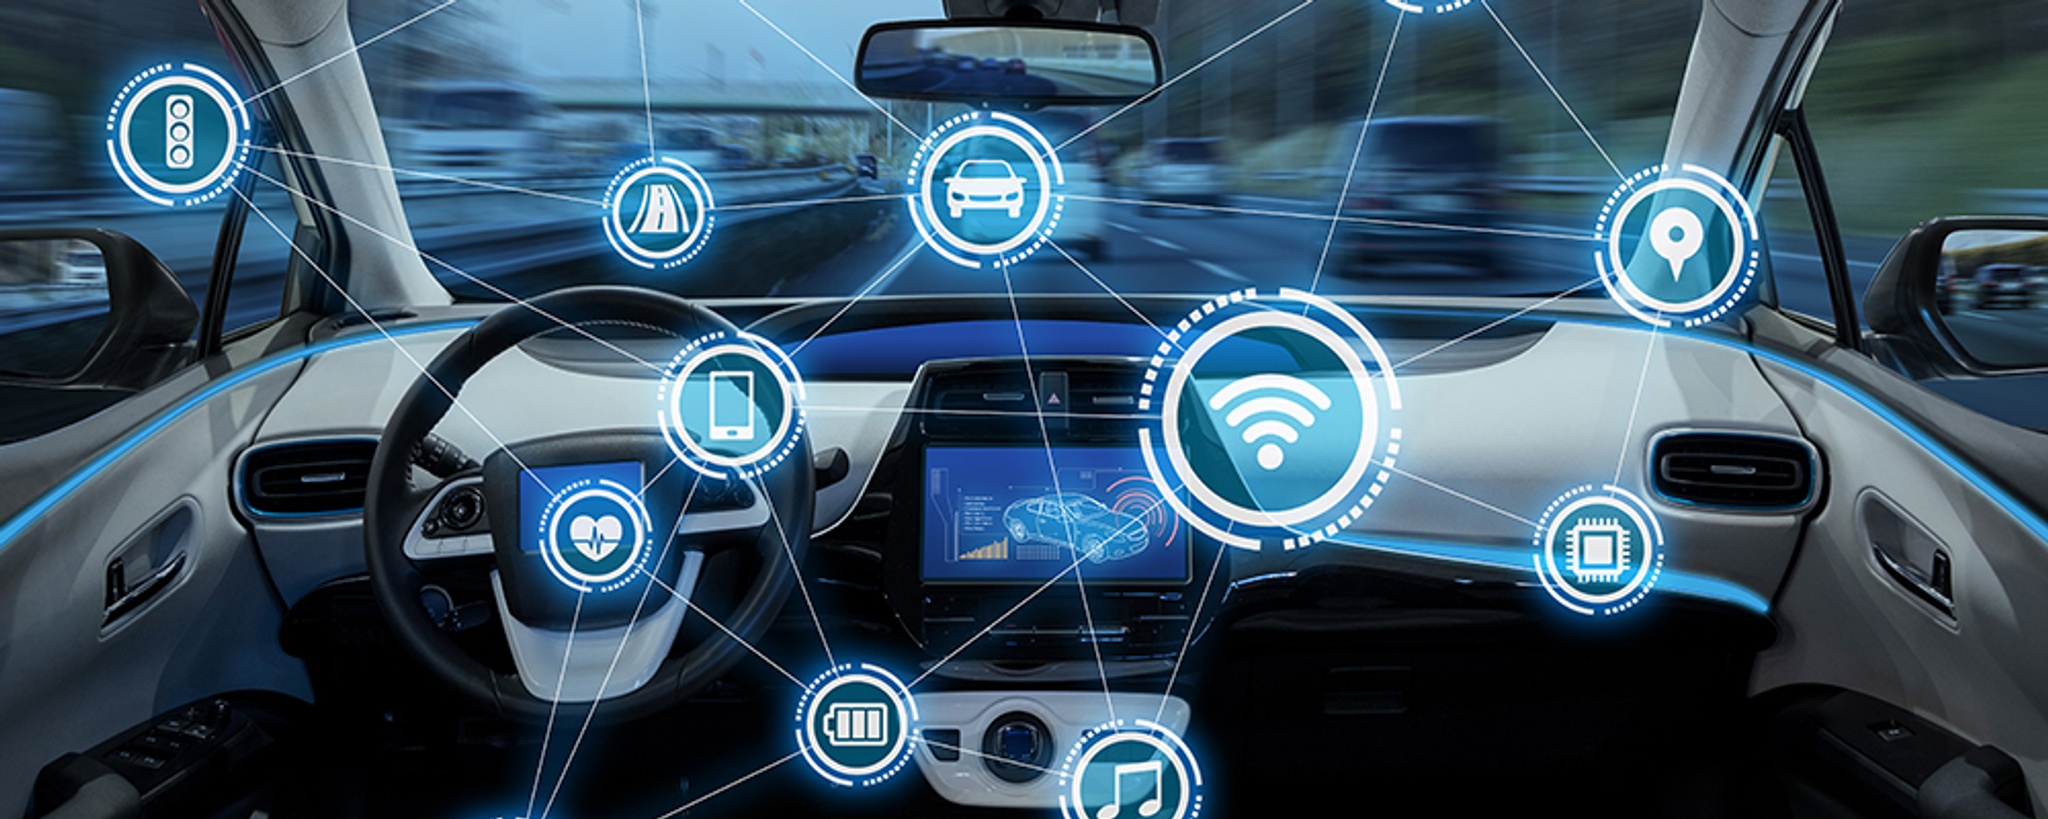 A Policymaker’s Guide to Connected Cars